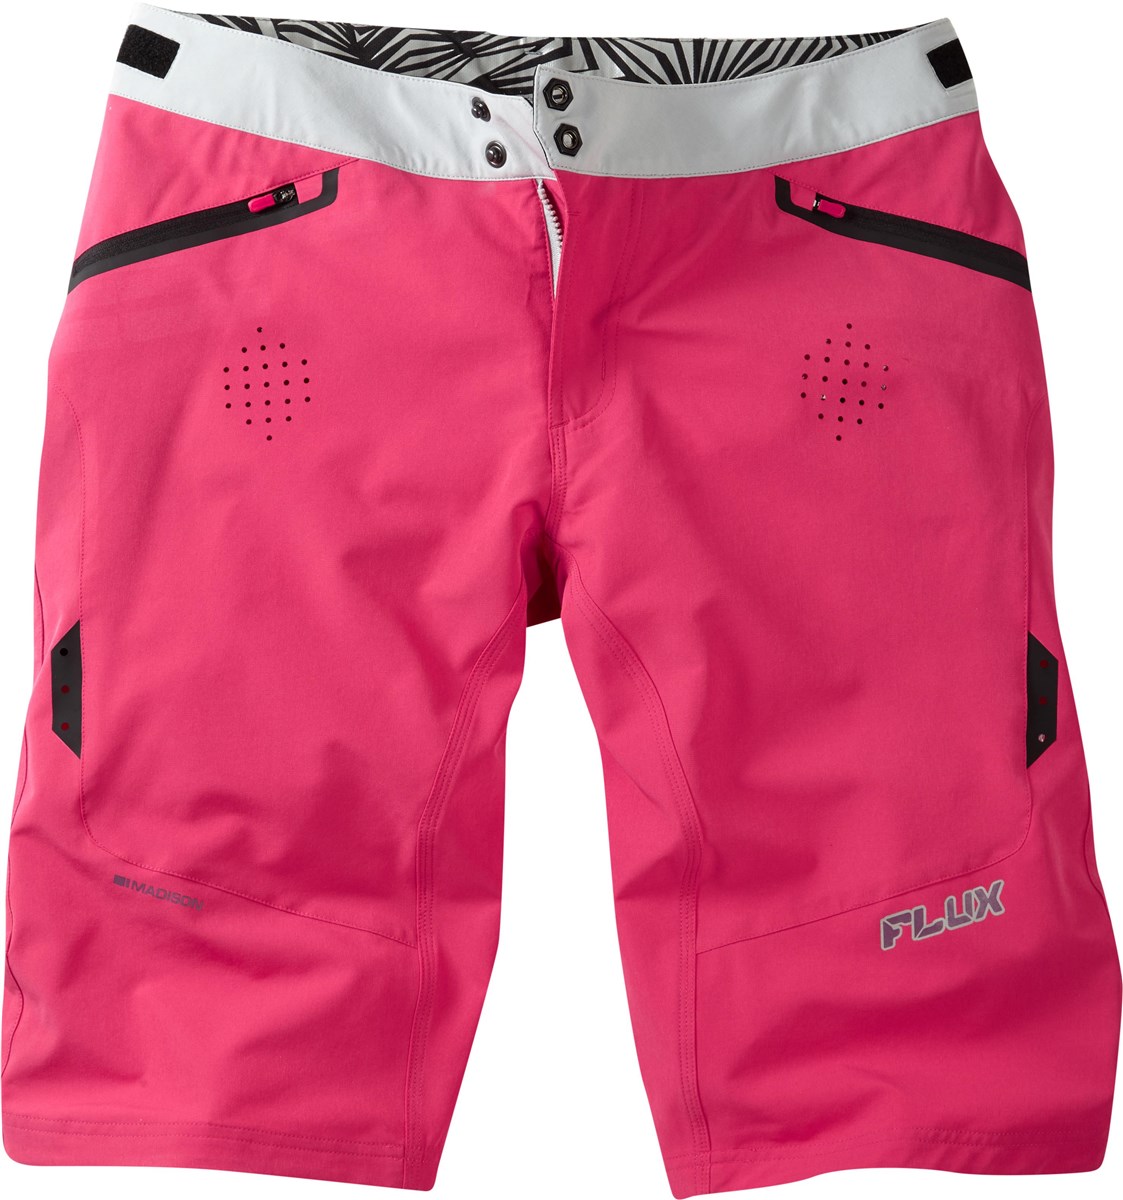 Madison Flux Womens Cycling Shorts product image